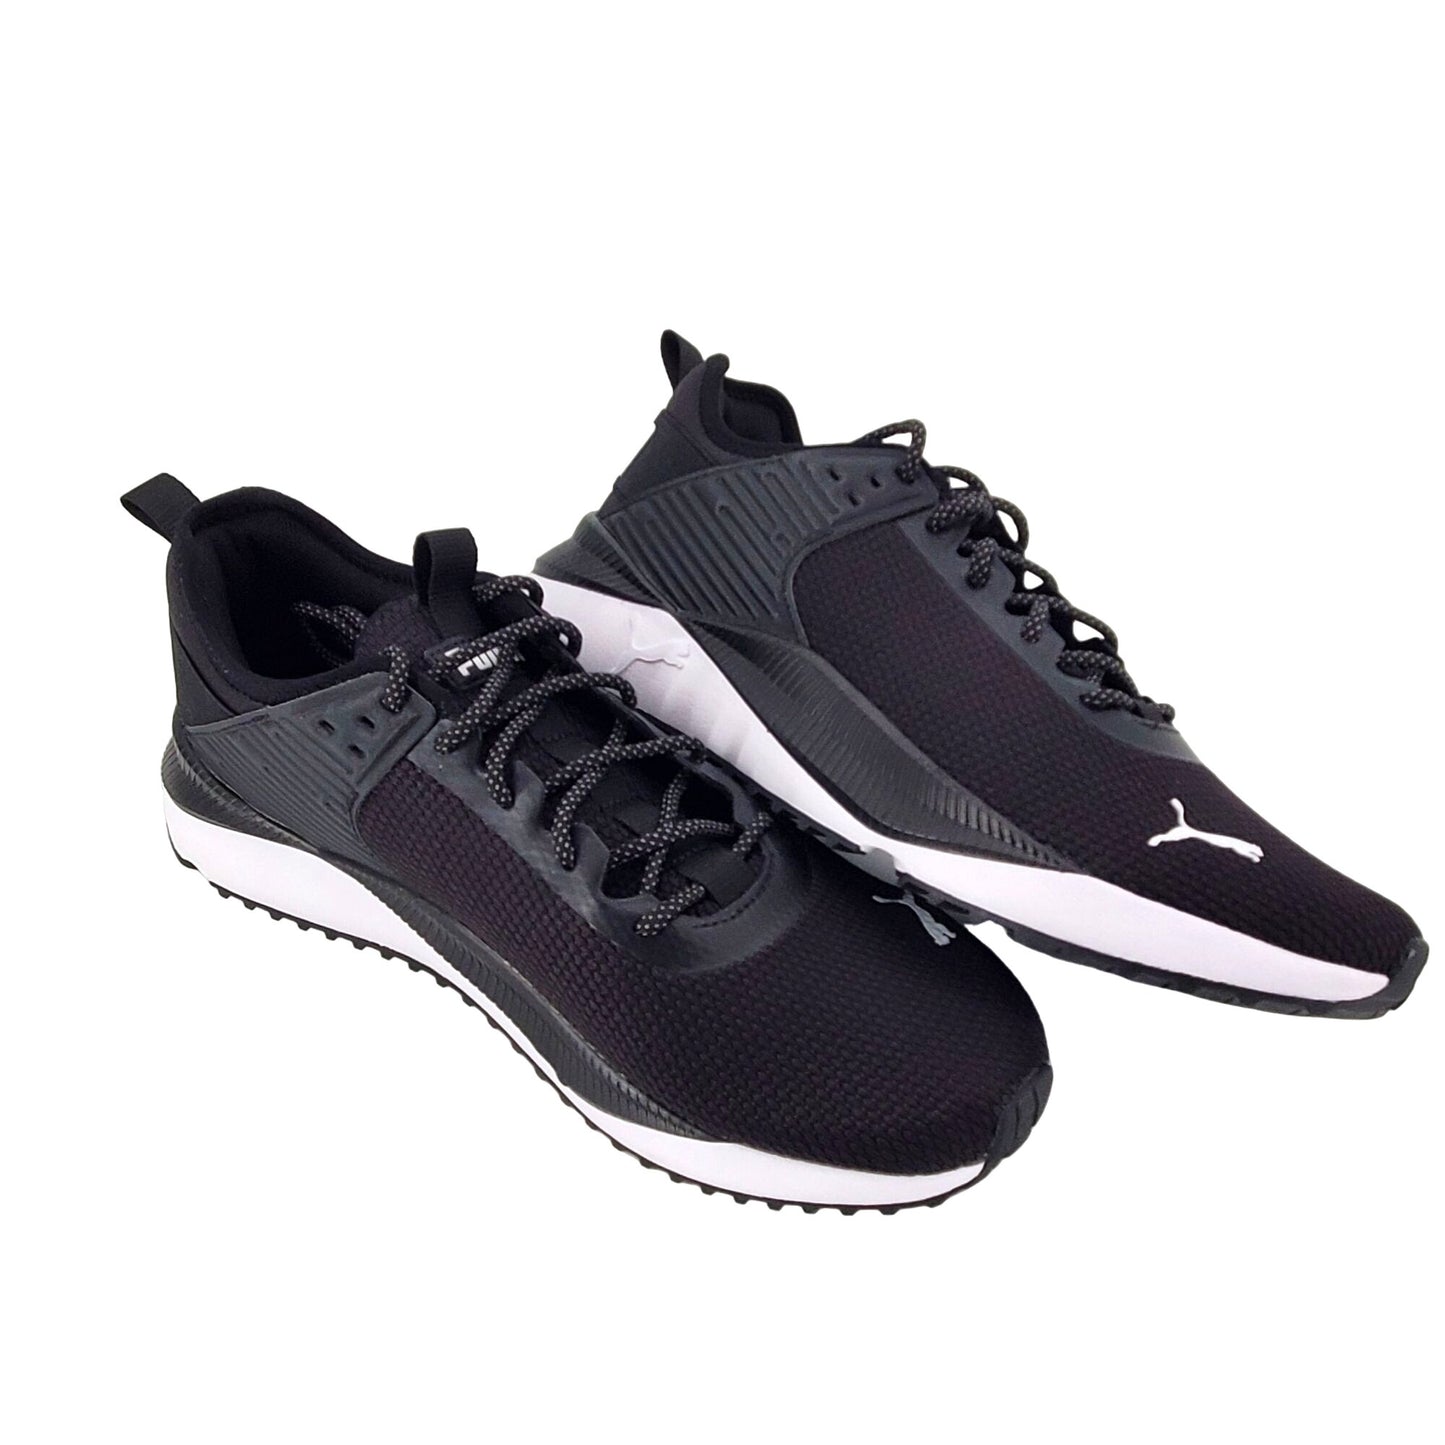 PUMA Sneakers Men's PC Runner Activewear Shoes Breathable Athletic Black